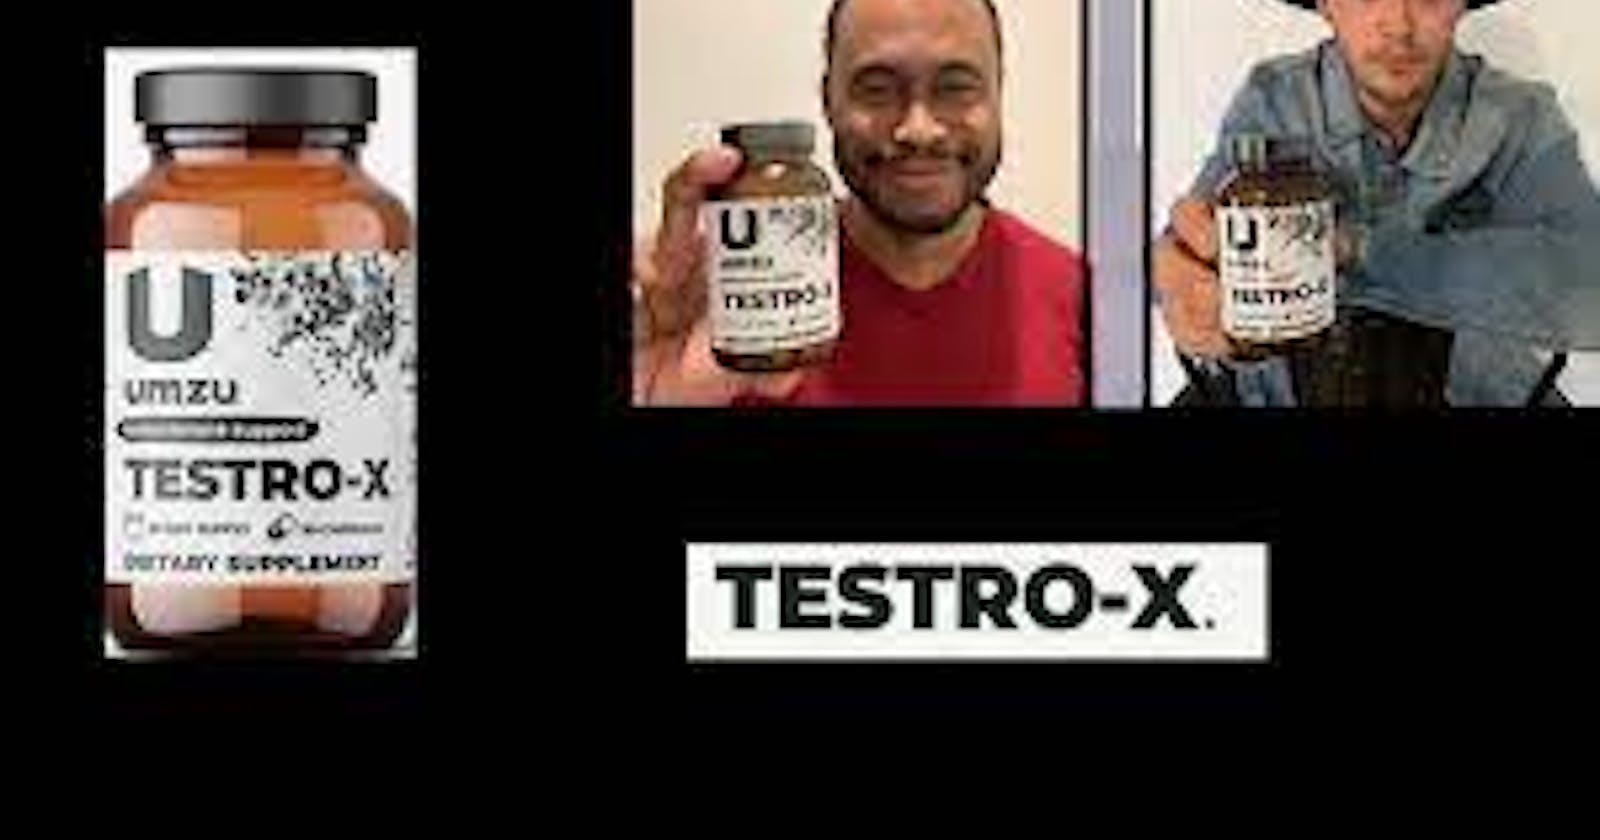 # UMZU Testro-X: A Comprehensive Review of the Testosterone Support Supplement